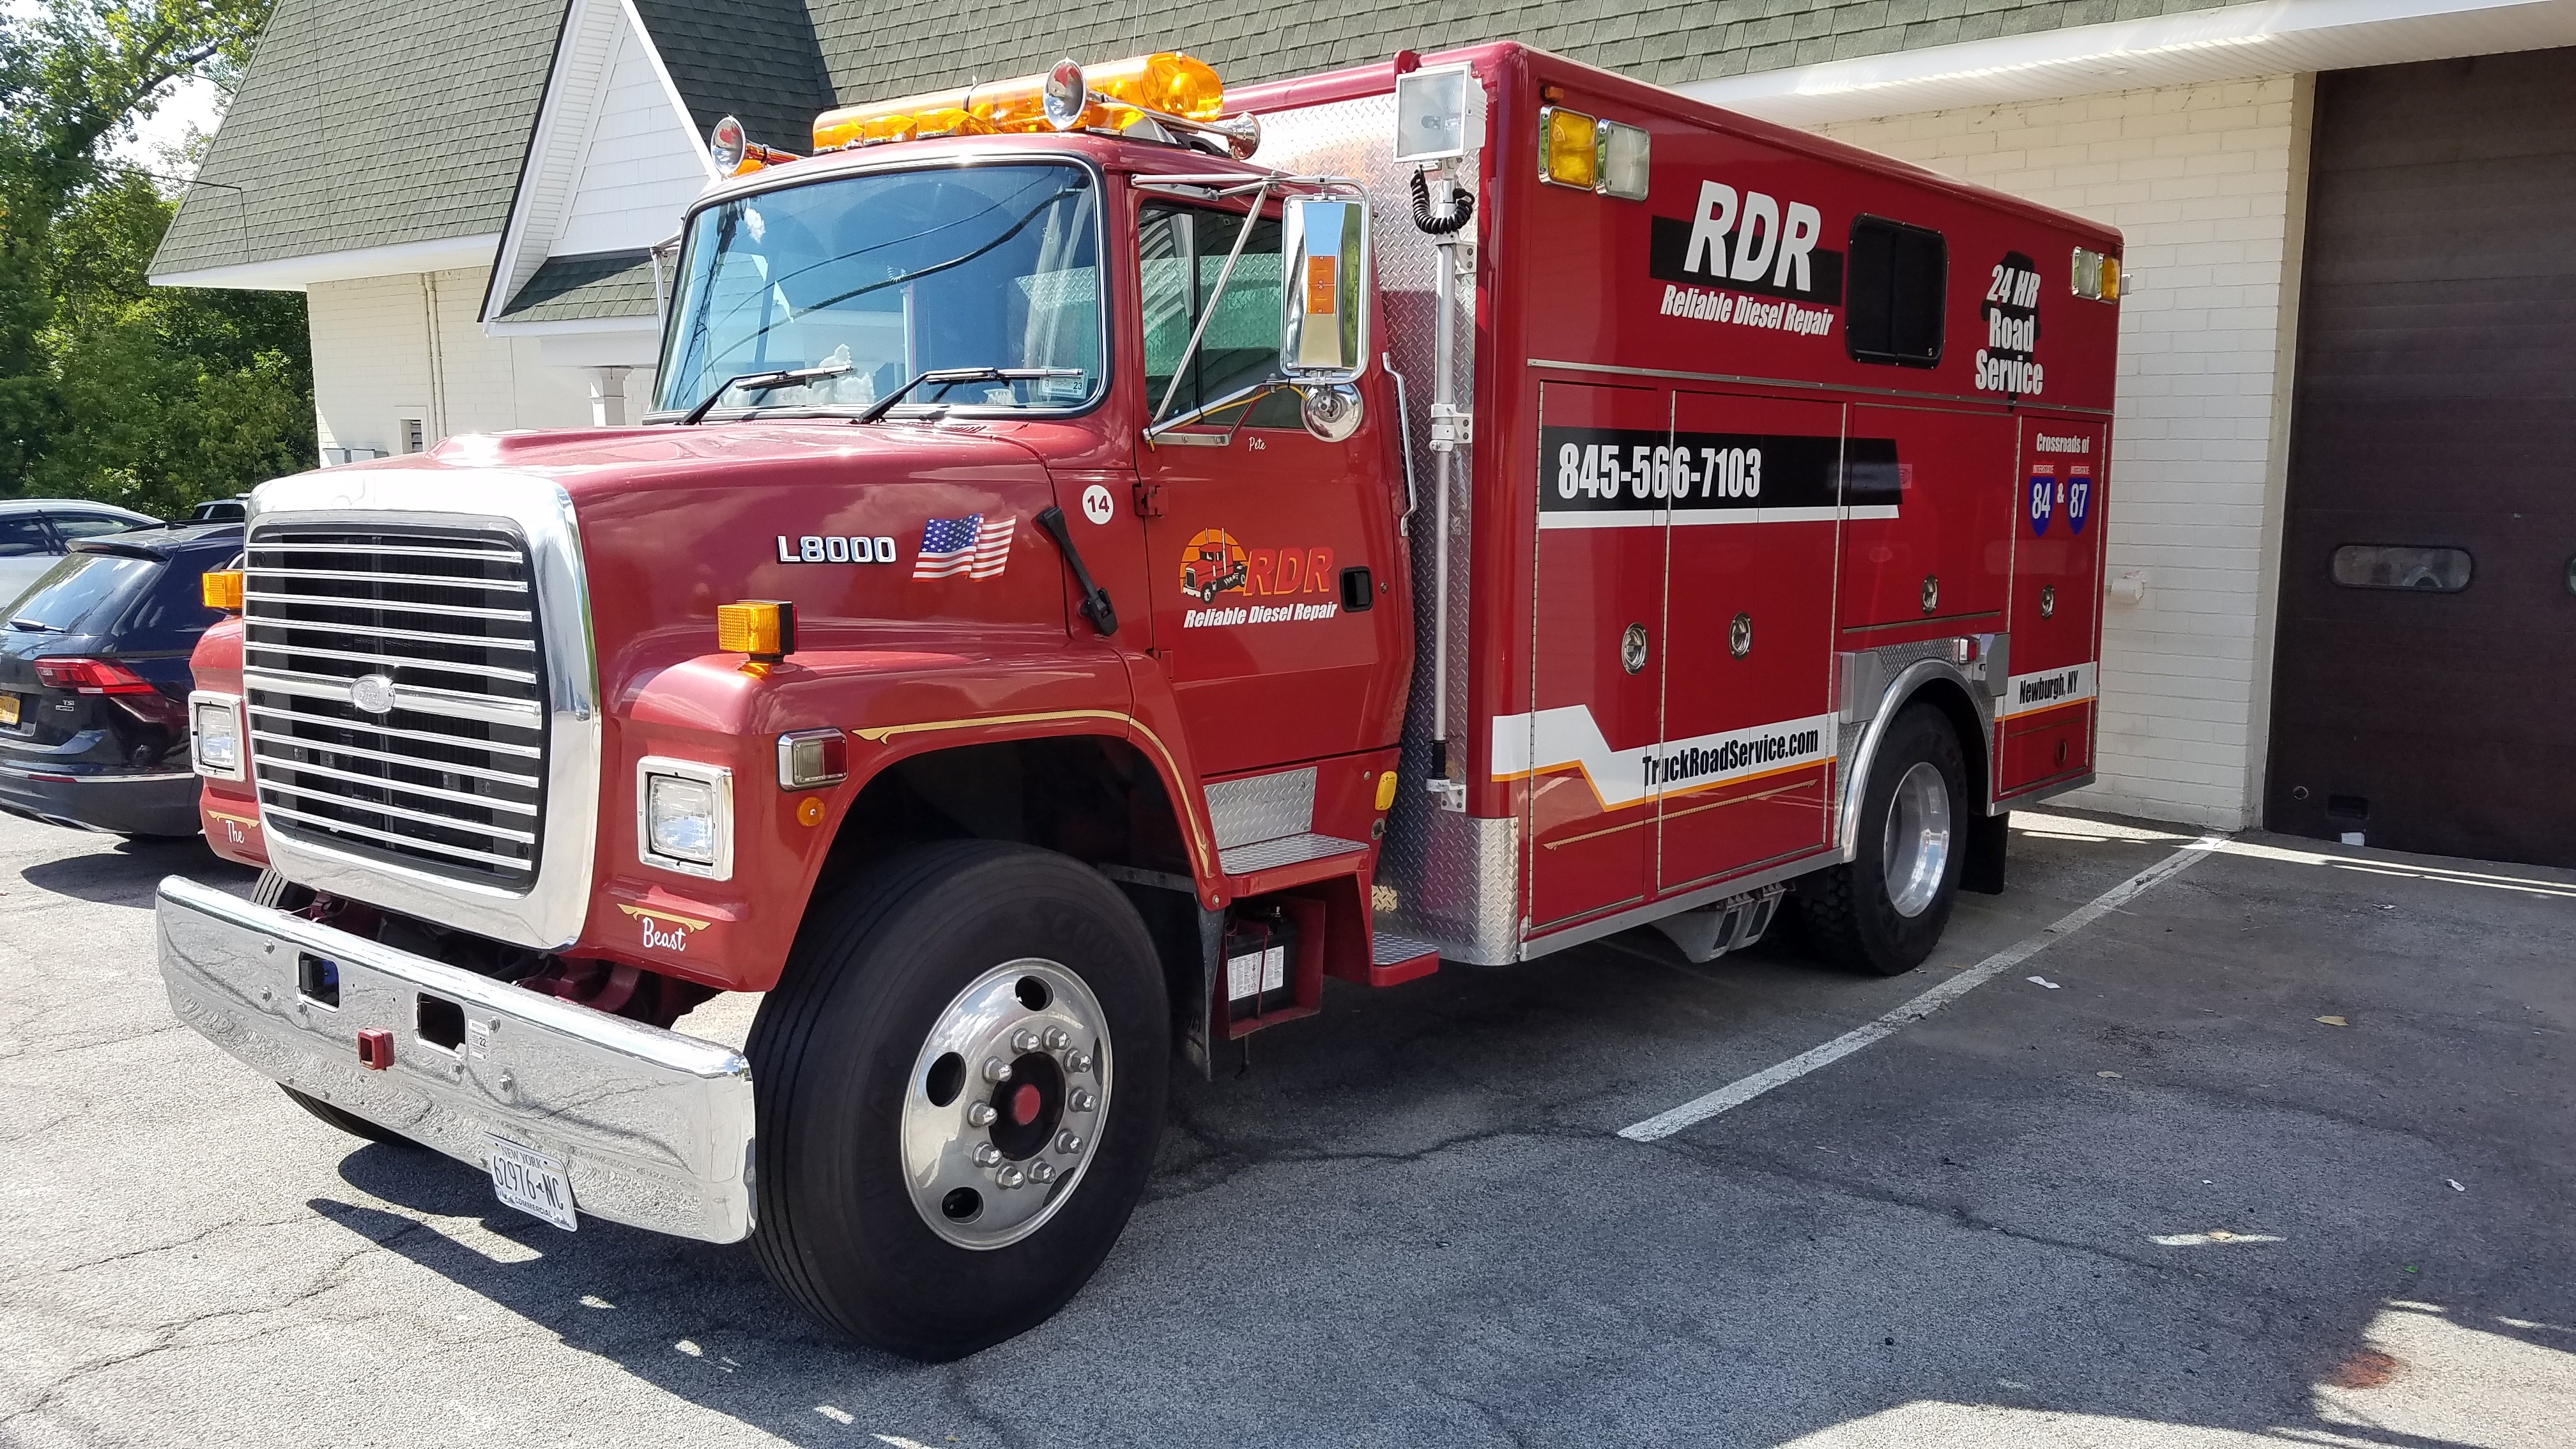 1995 Ford LN8000 with an American Rural Rescue Truck Body. MD3060 6 Speed Allison